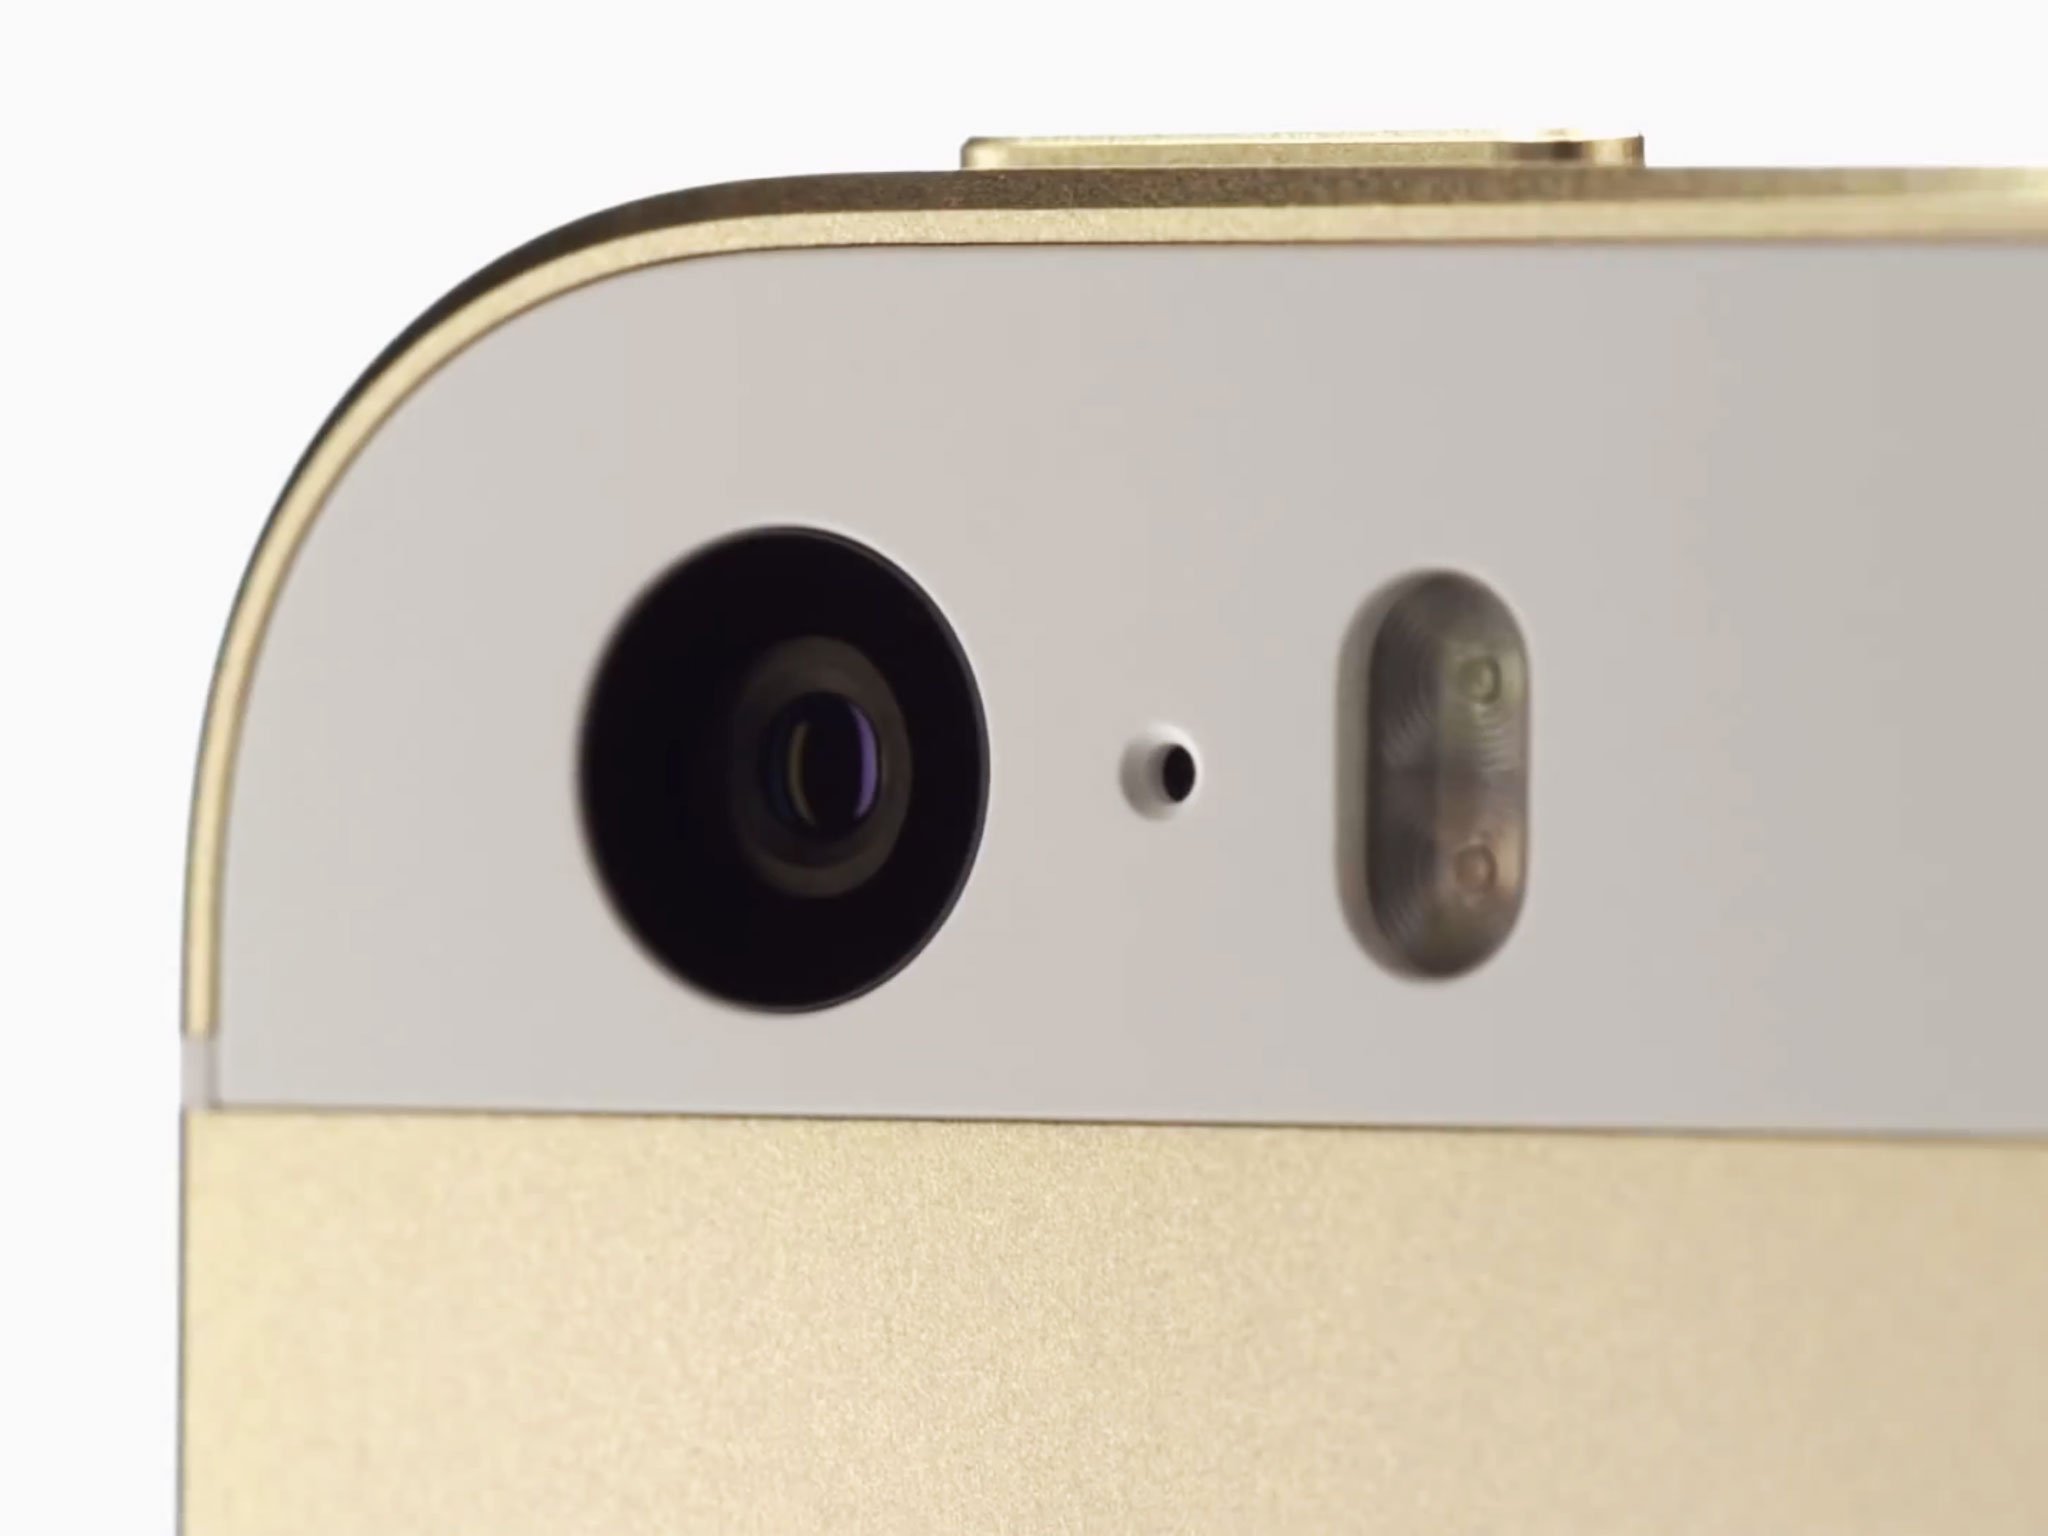 iPhone 5s camera: Better balance, exposure, sharpness, low-light, and slow mo for every day photos